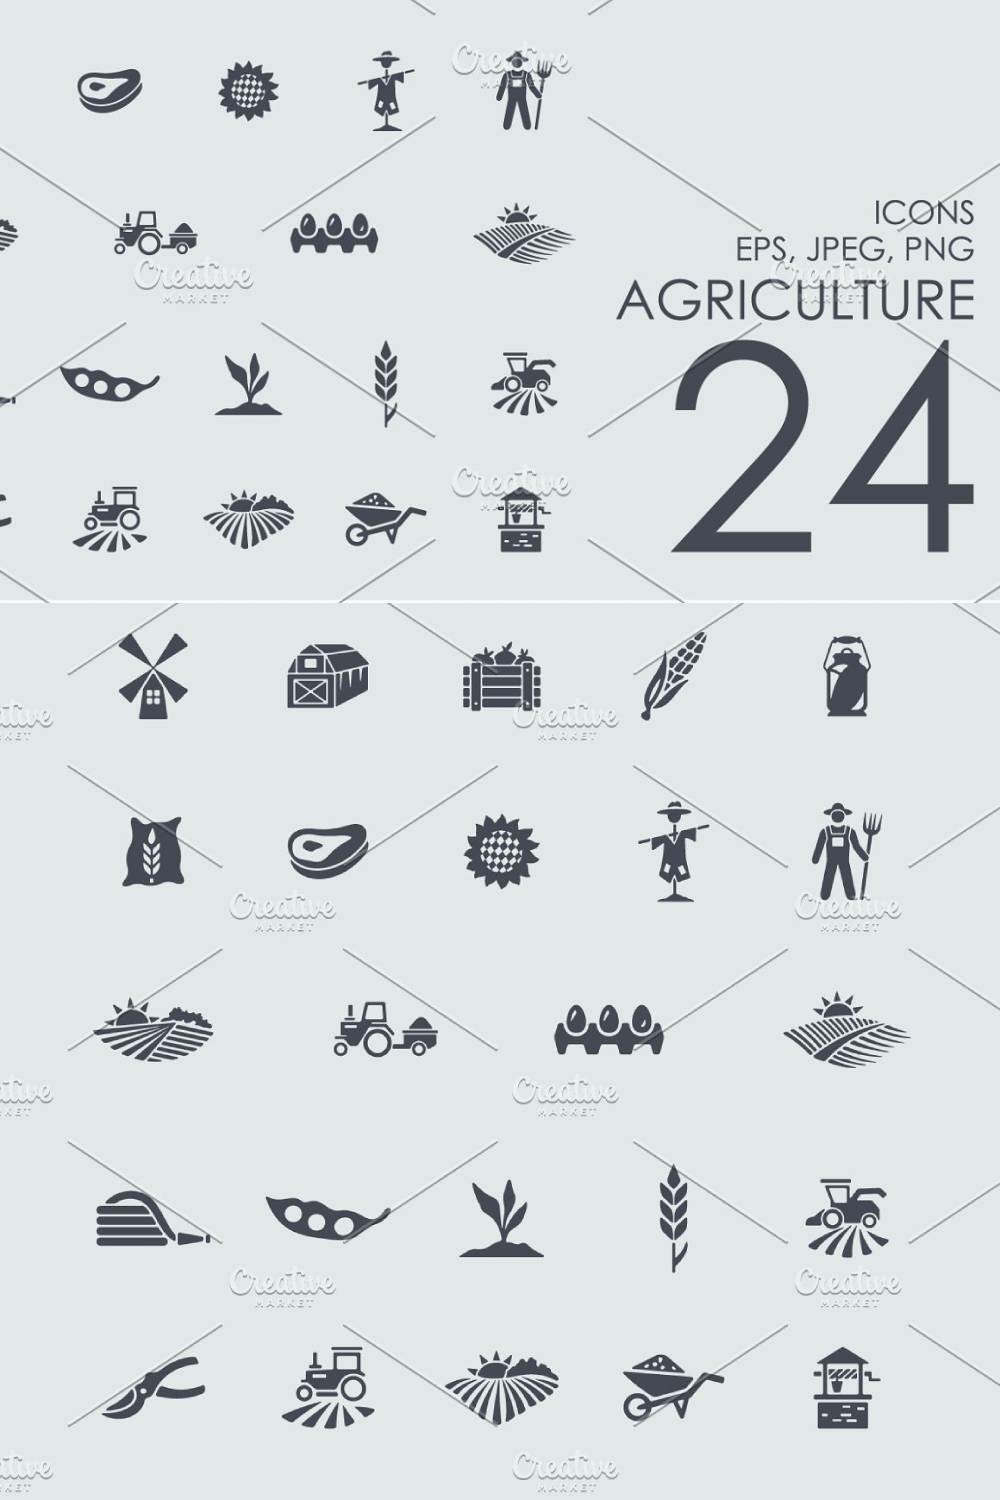 24 Agriculture Icons Pinterest Cover.